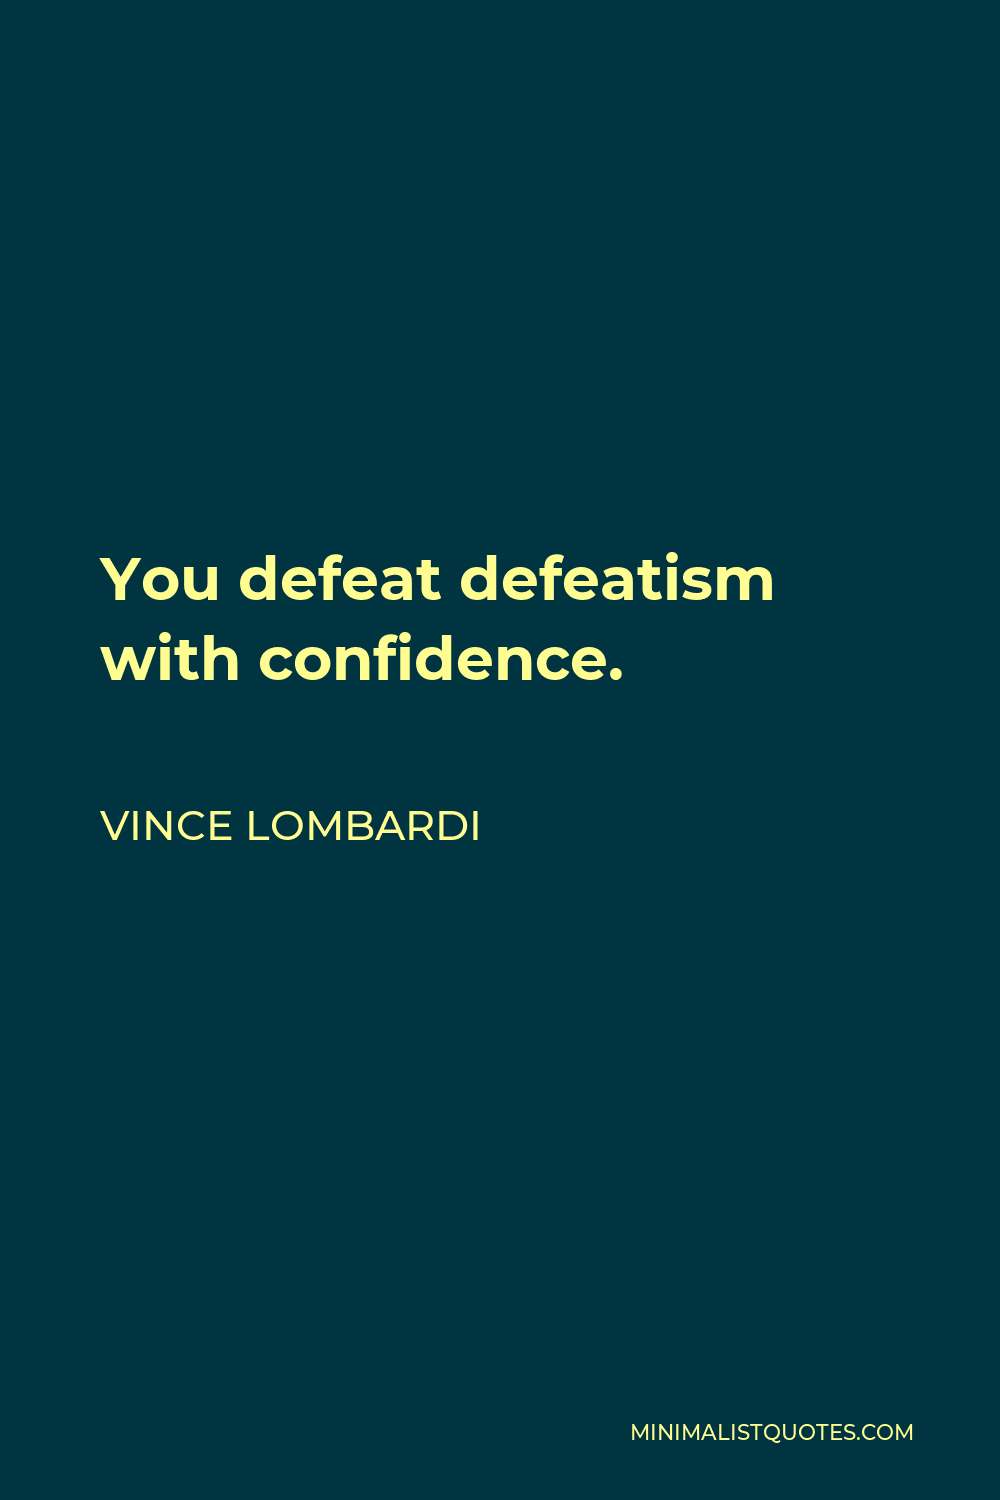 Vince Lombardi Quote - You defeat defeatism with confidence.